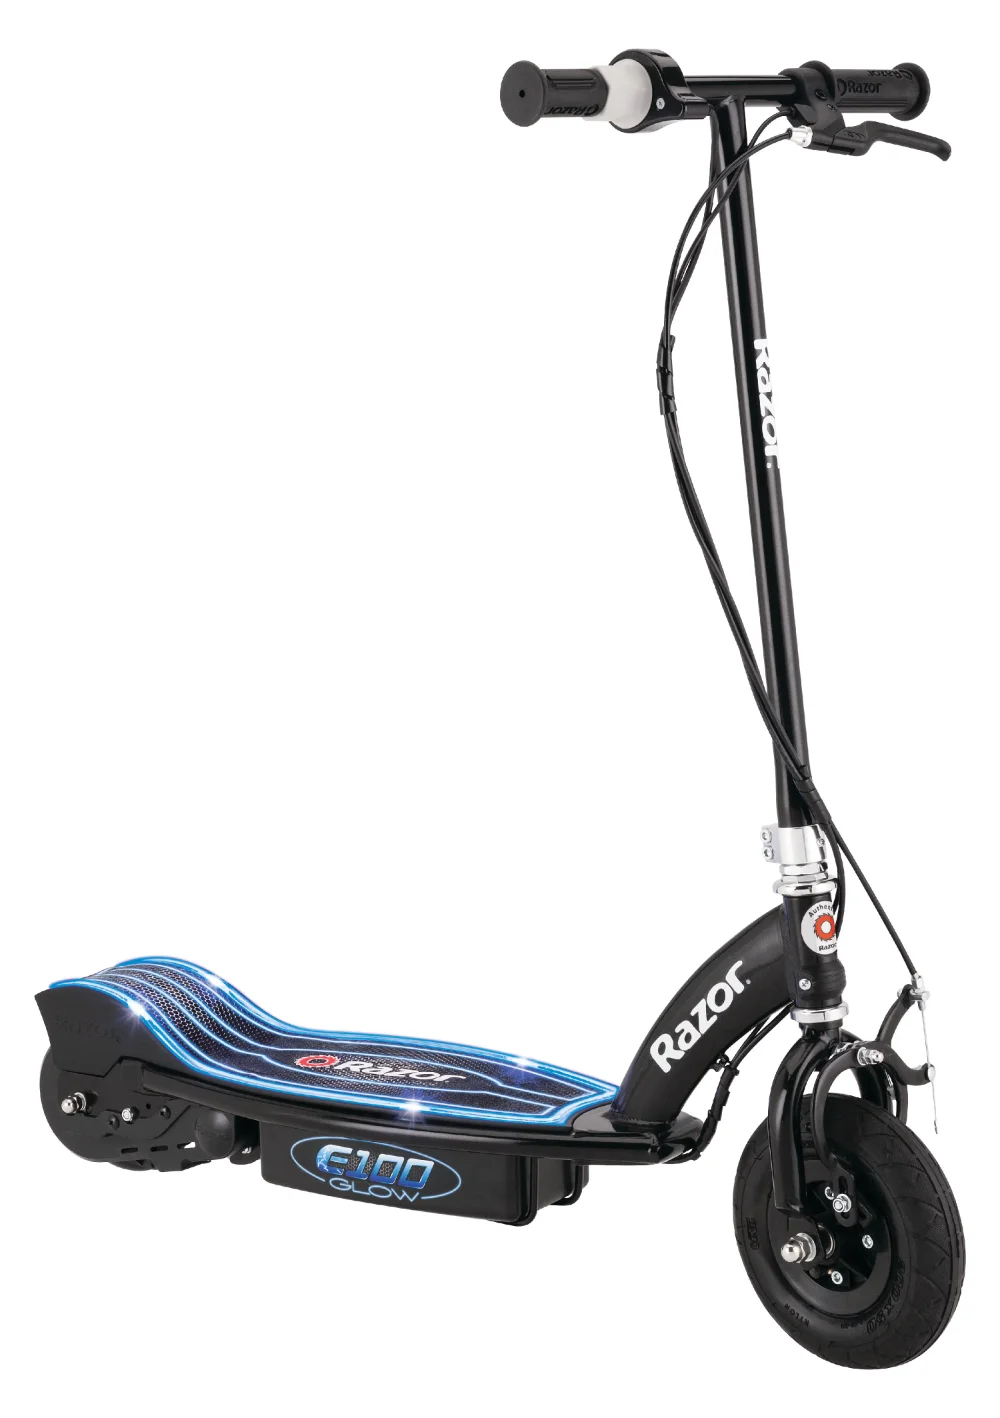 

E100 Glow Electric Scooter for Kids Ages 8+ and up to 120 lbs, 8" Pneumatic Front Tire, LED Light-Up Deck, 100W Chain Motor